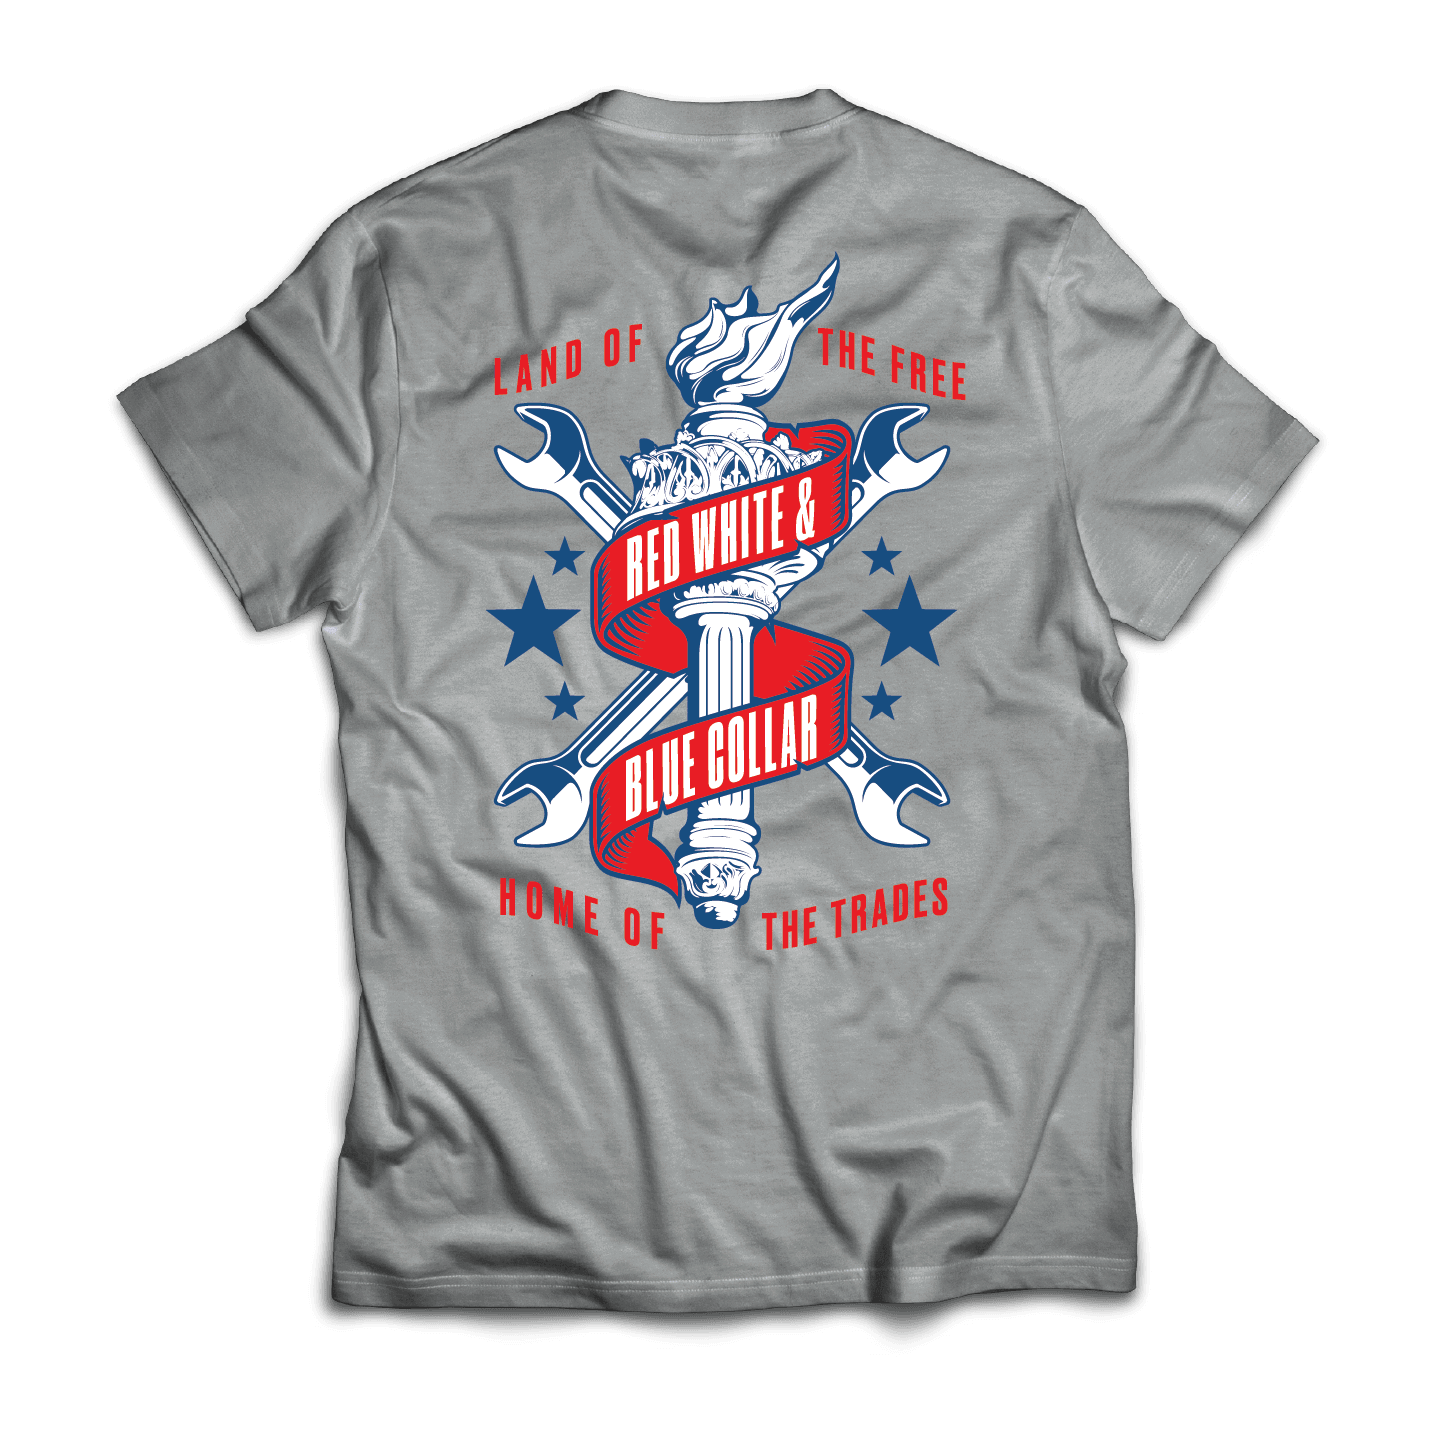 Give Me Liberty Tee, Grey - Purpose-Built / Home of the Trades